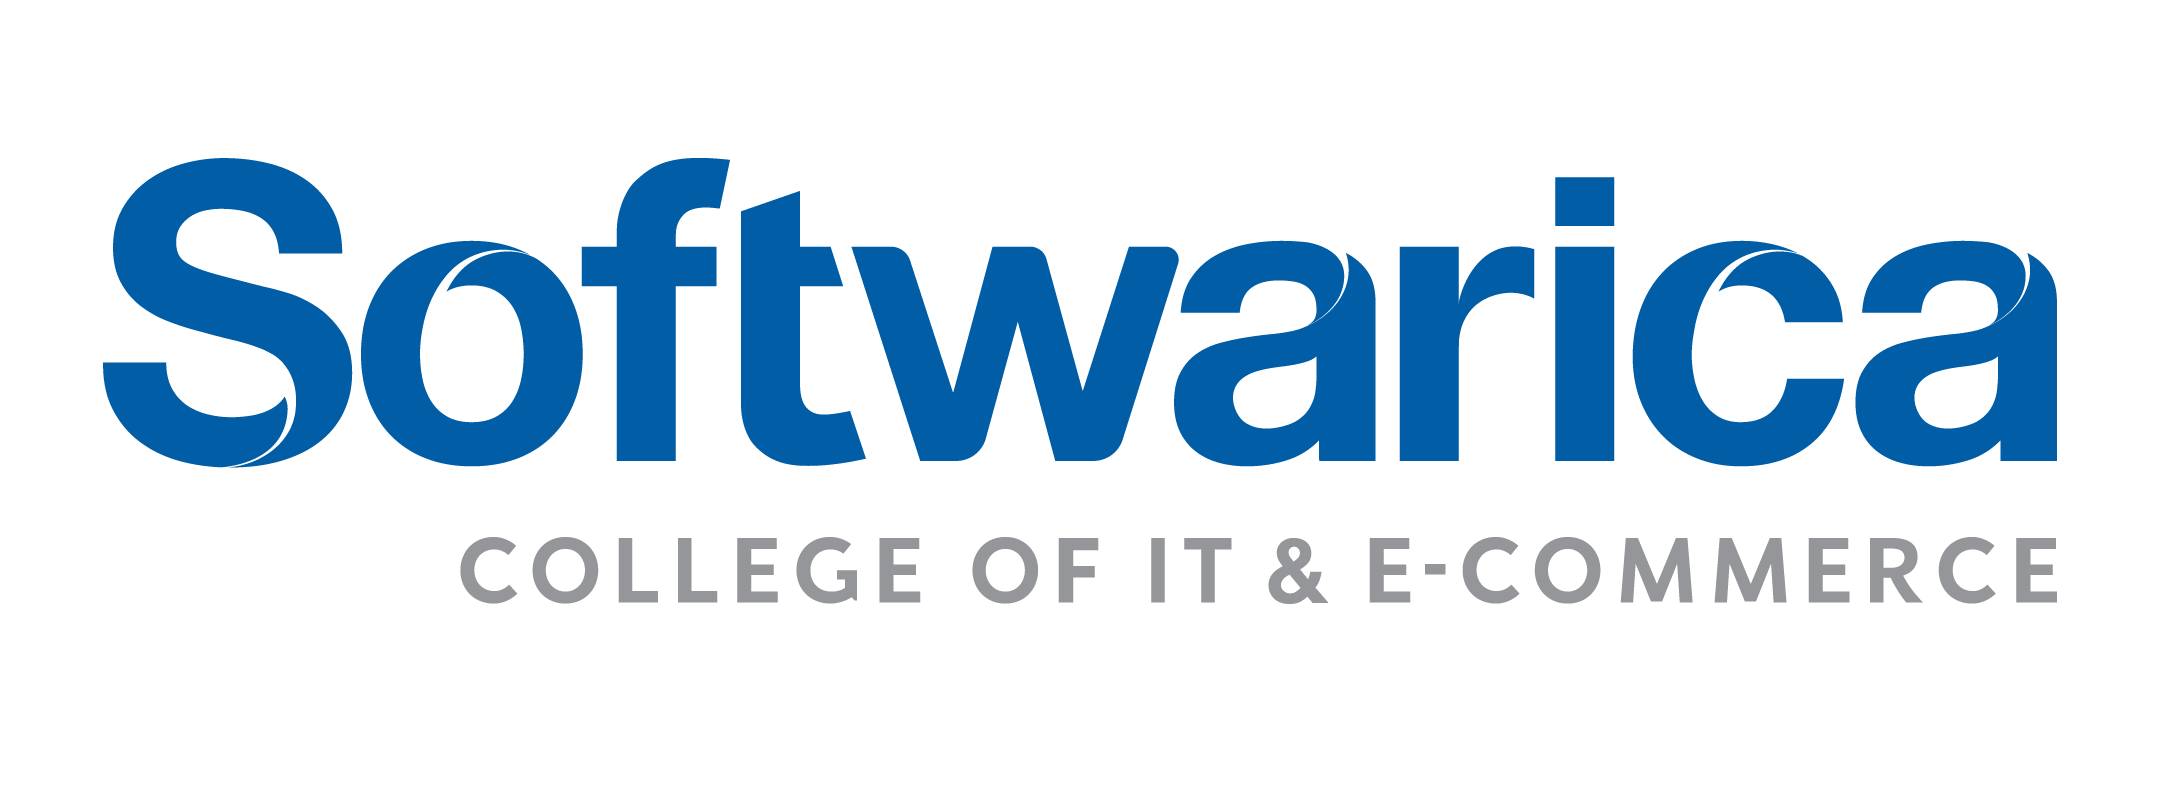 Softwarica College of IT & e-commerce logo.